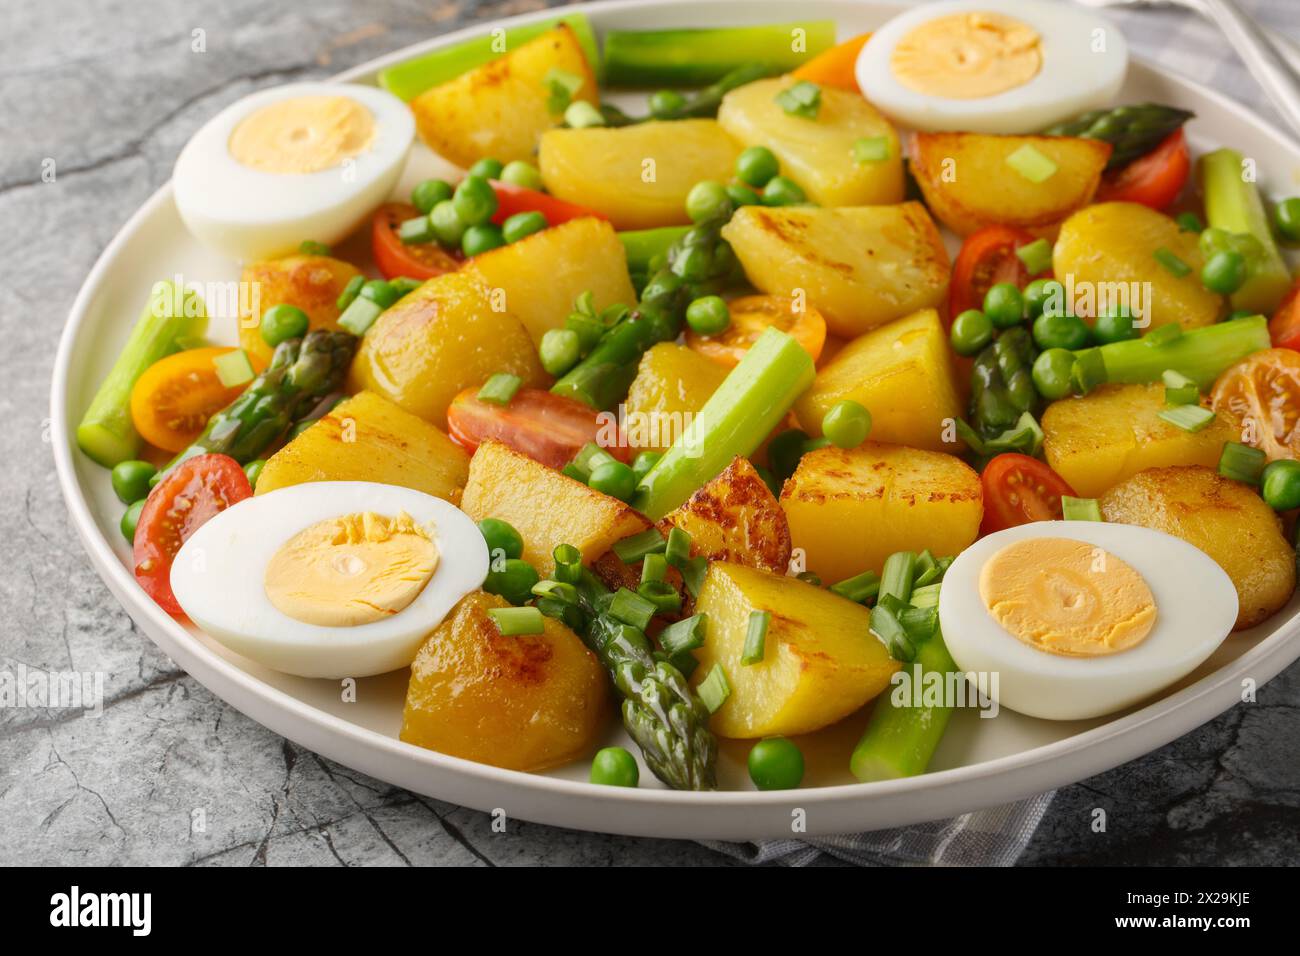 Salad with roasted potatoes, asparagus, boiled egg, tomato and peas closeup on the plate on the table. Horizontal Stock Photo